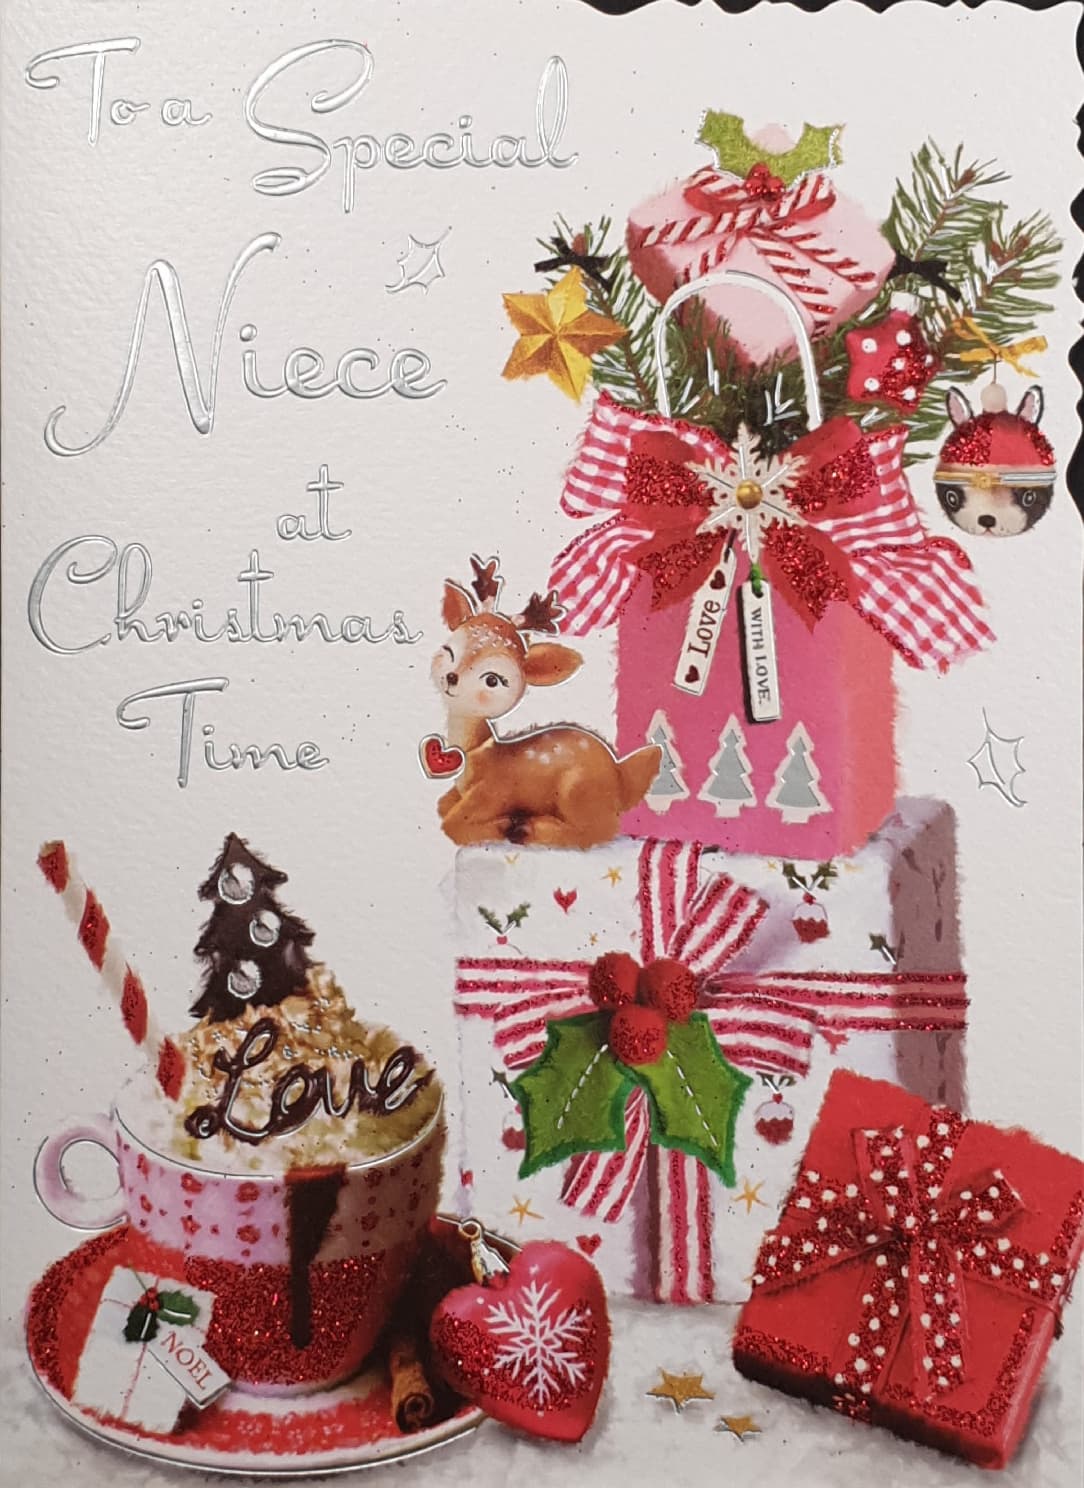 Niece Christmas Card - Hot Chocolate & Decorated Gift Boxes